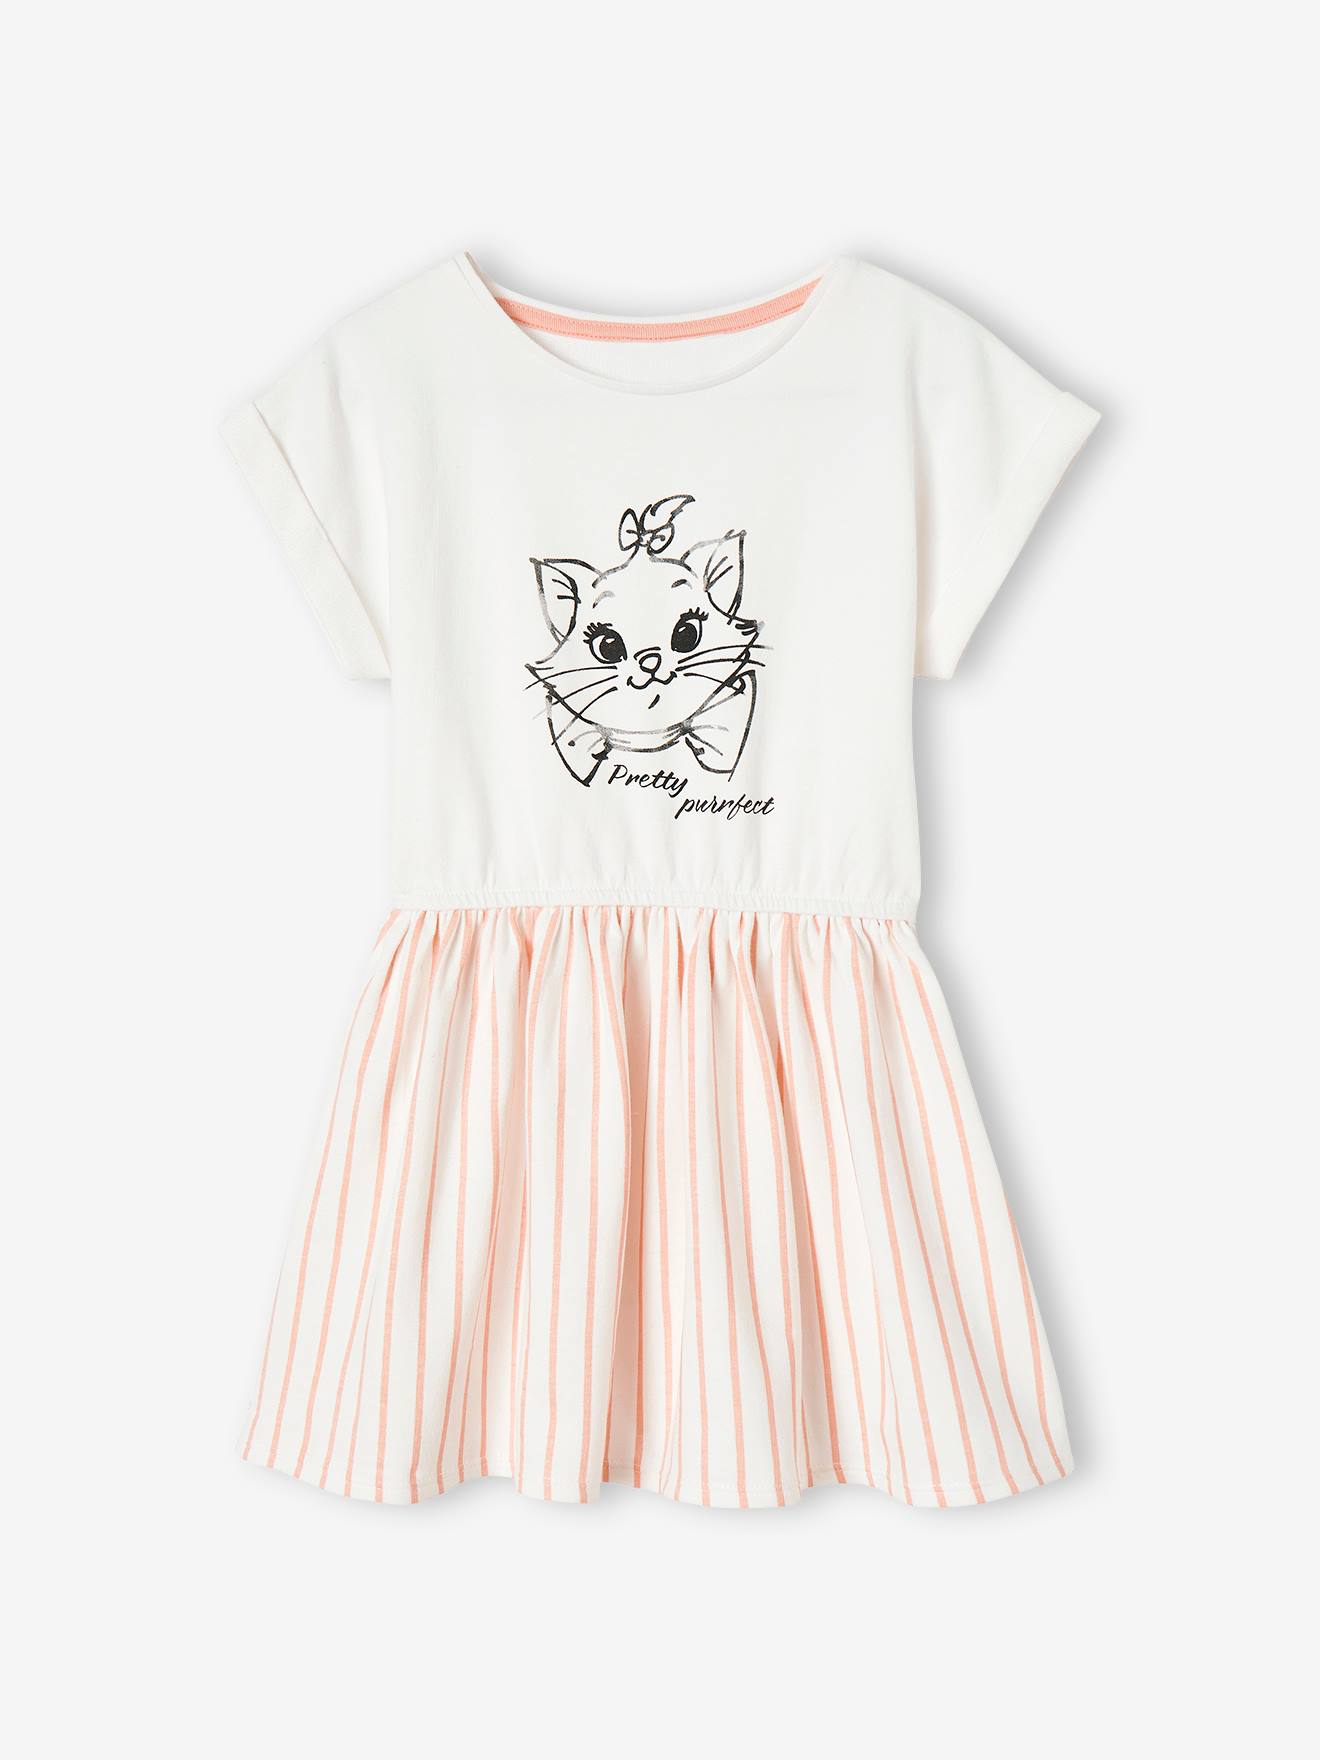 Marie of The Aristocats Sweatshirt Dress by Disney(r) for Girls pale pink